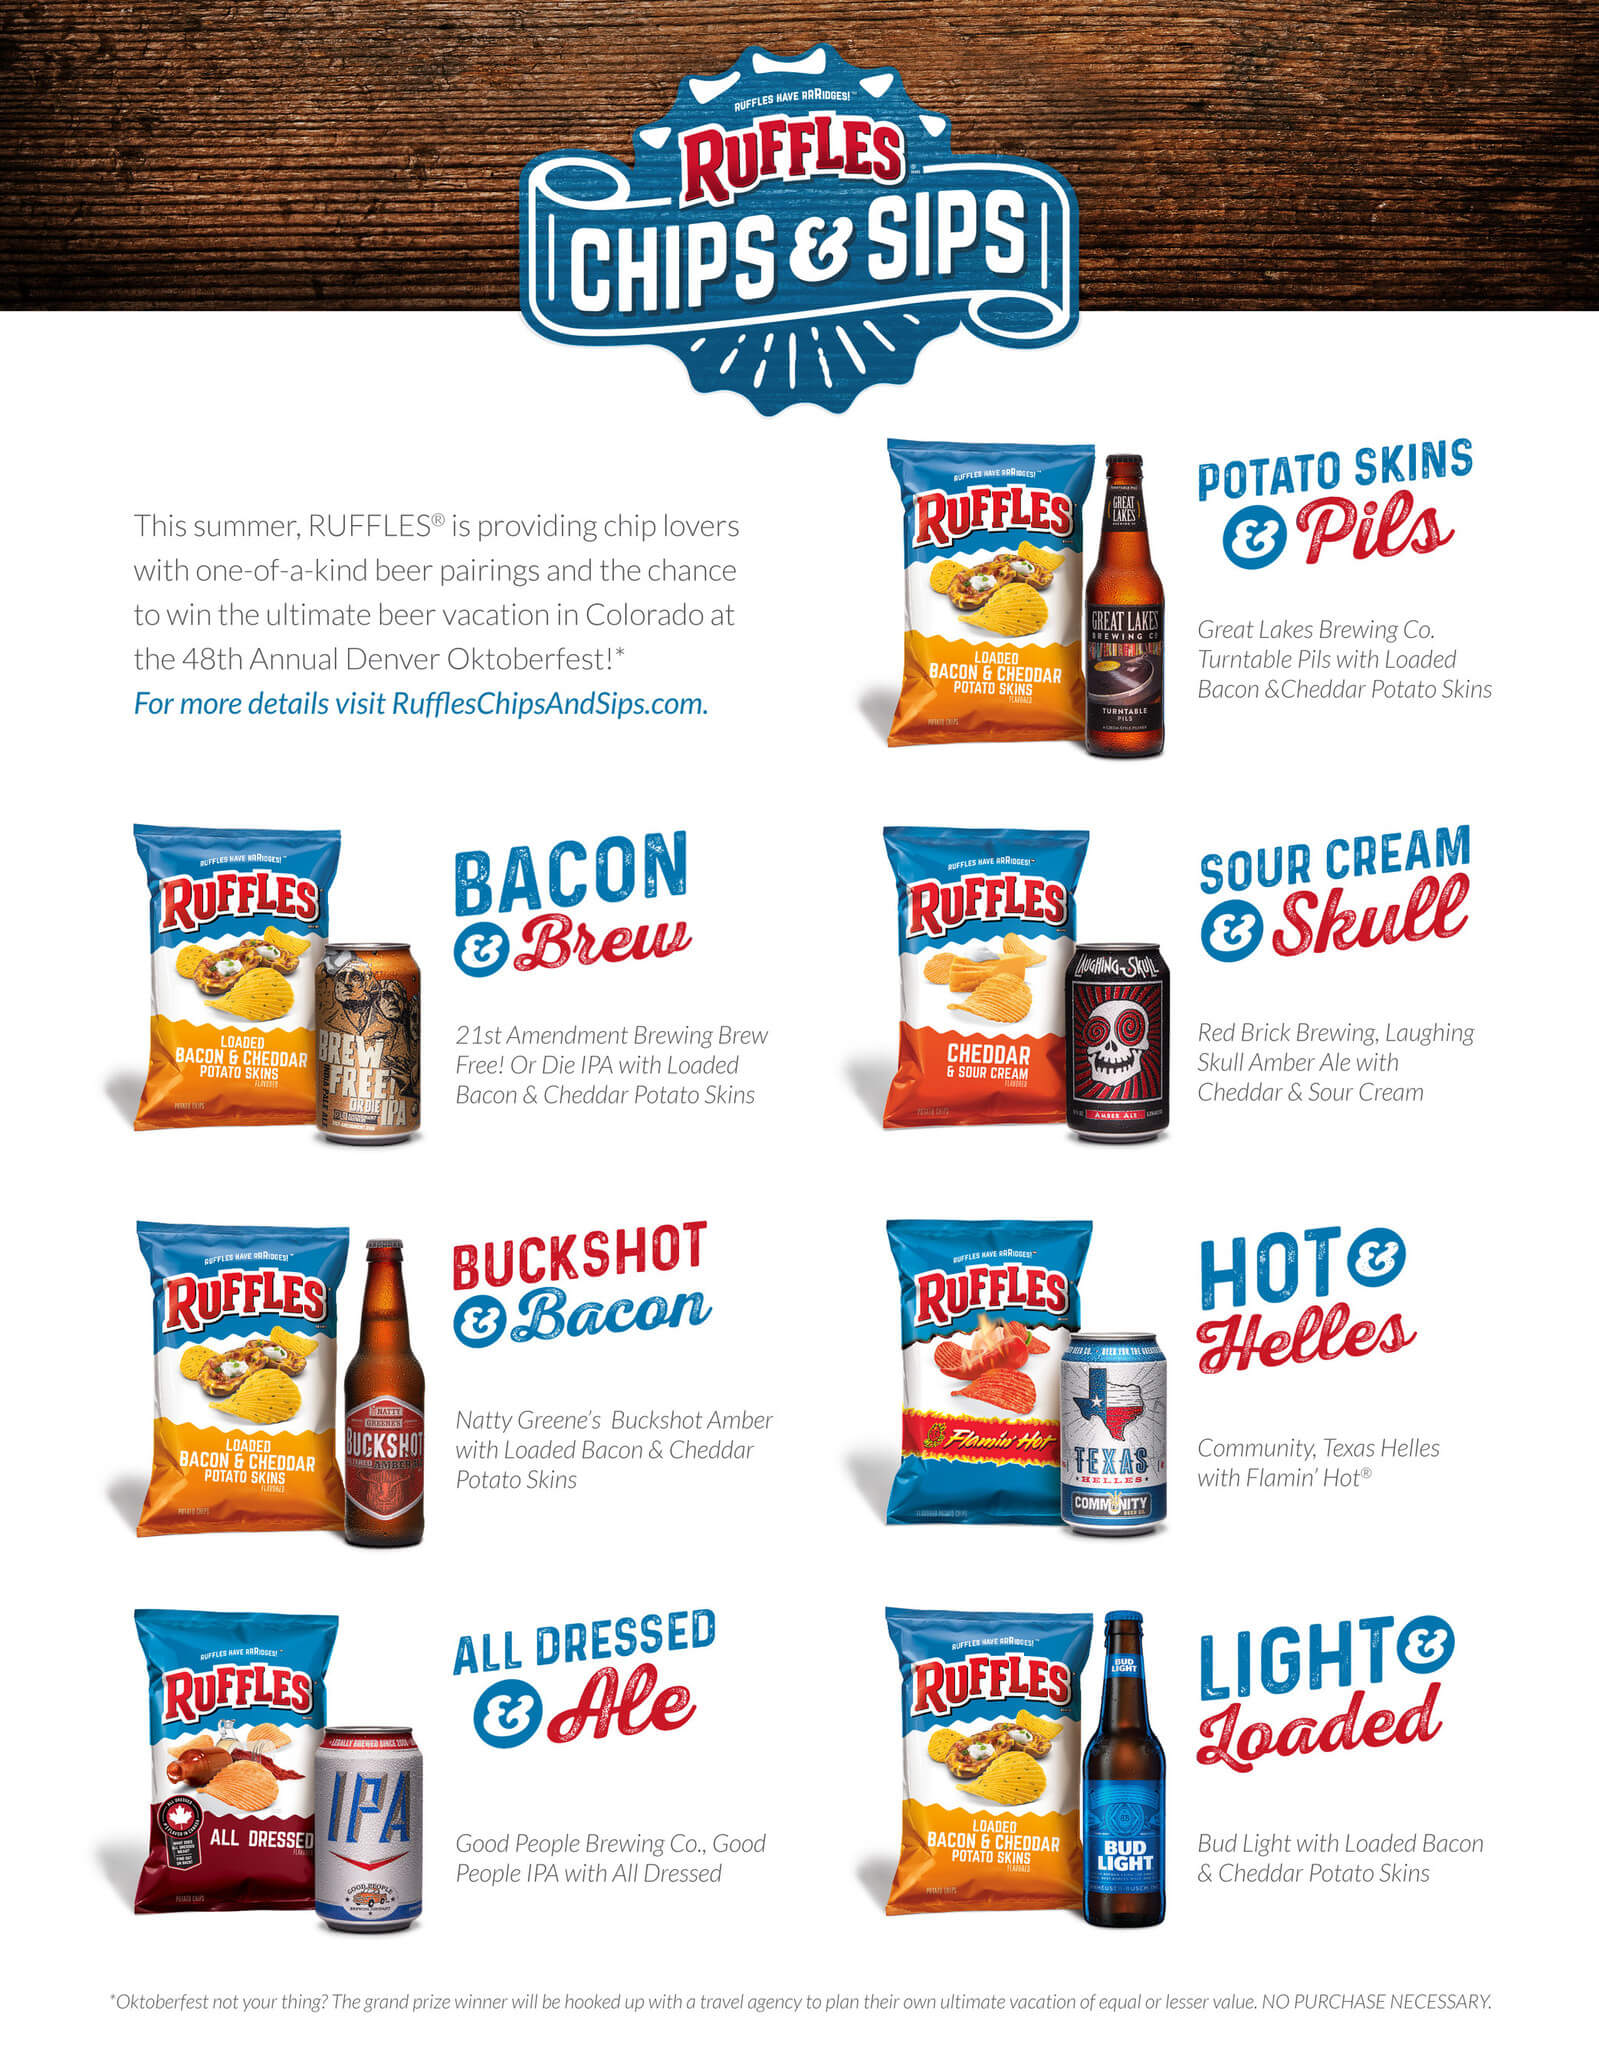 Frito-Lay Ruffles Brand Potato Chips partners with national and local craft breweries for Chips & Sips pairing guide - What's Shakin' week of July 24